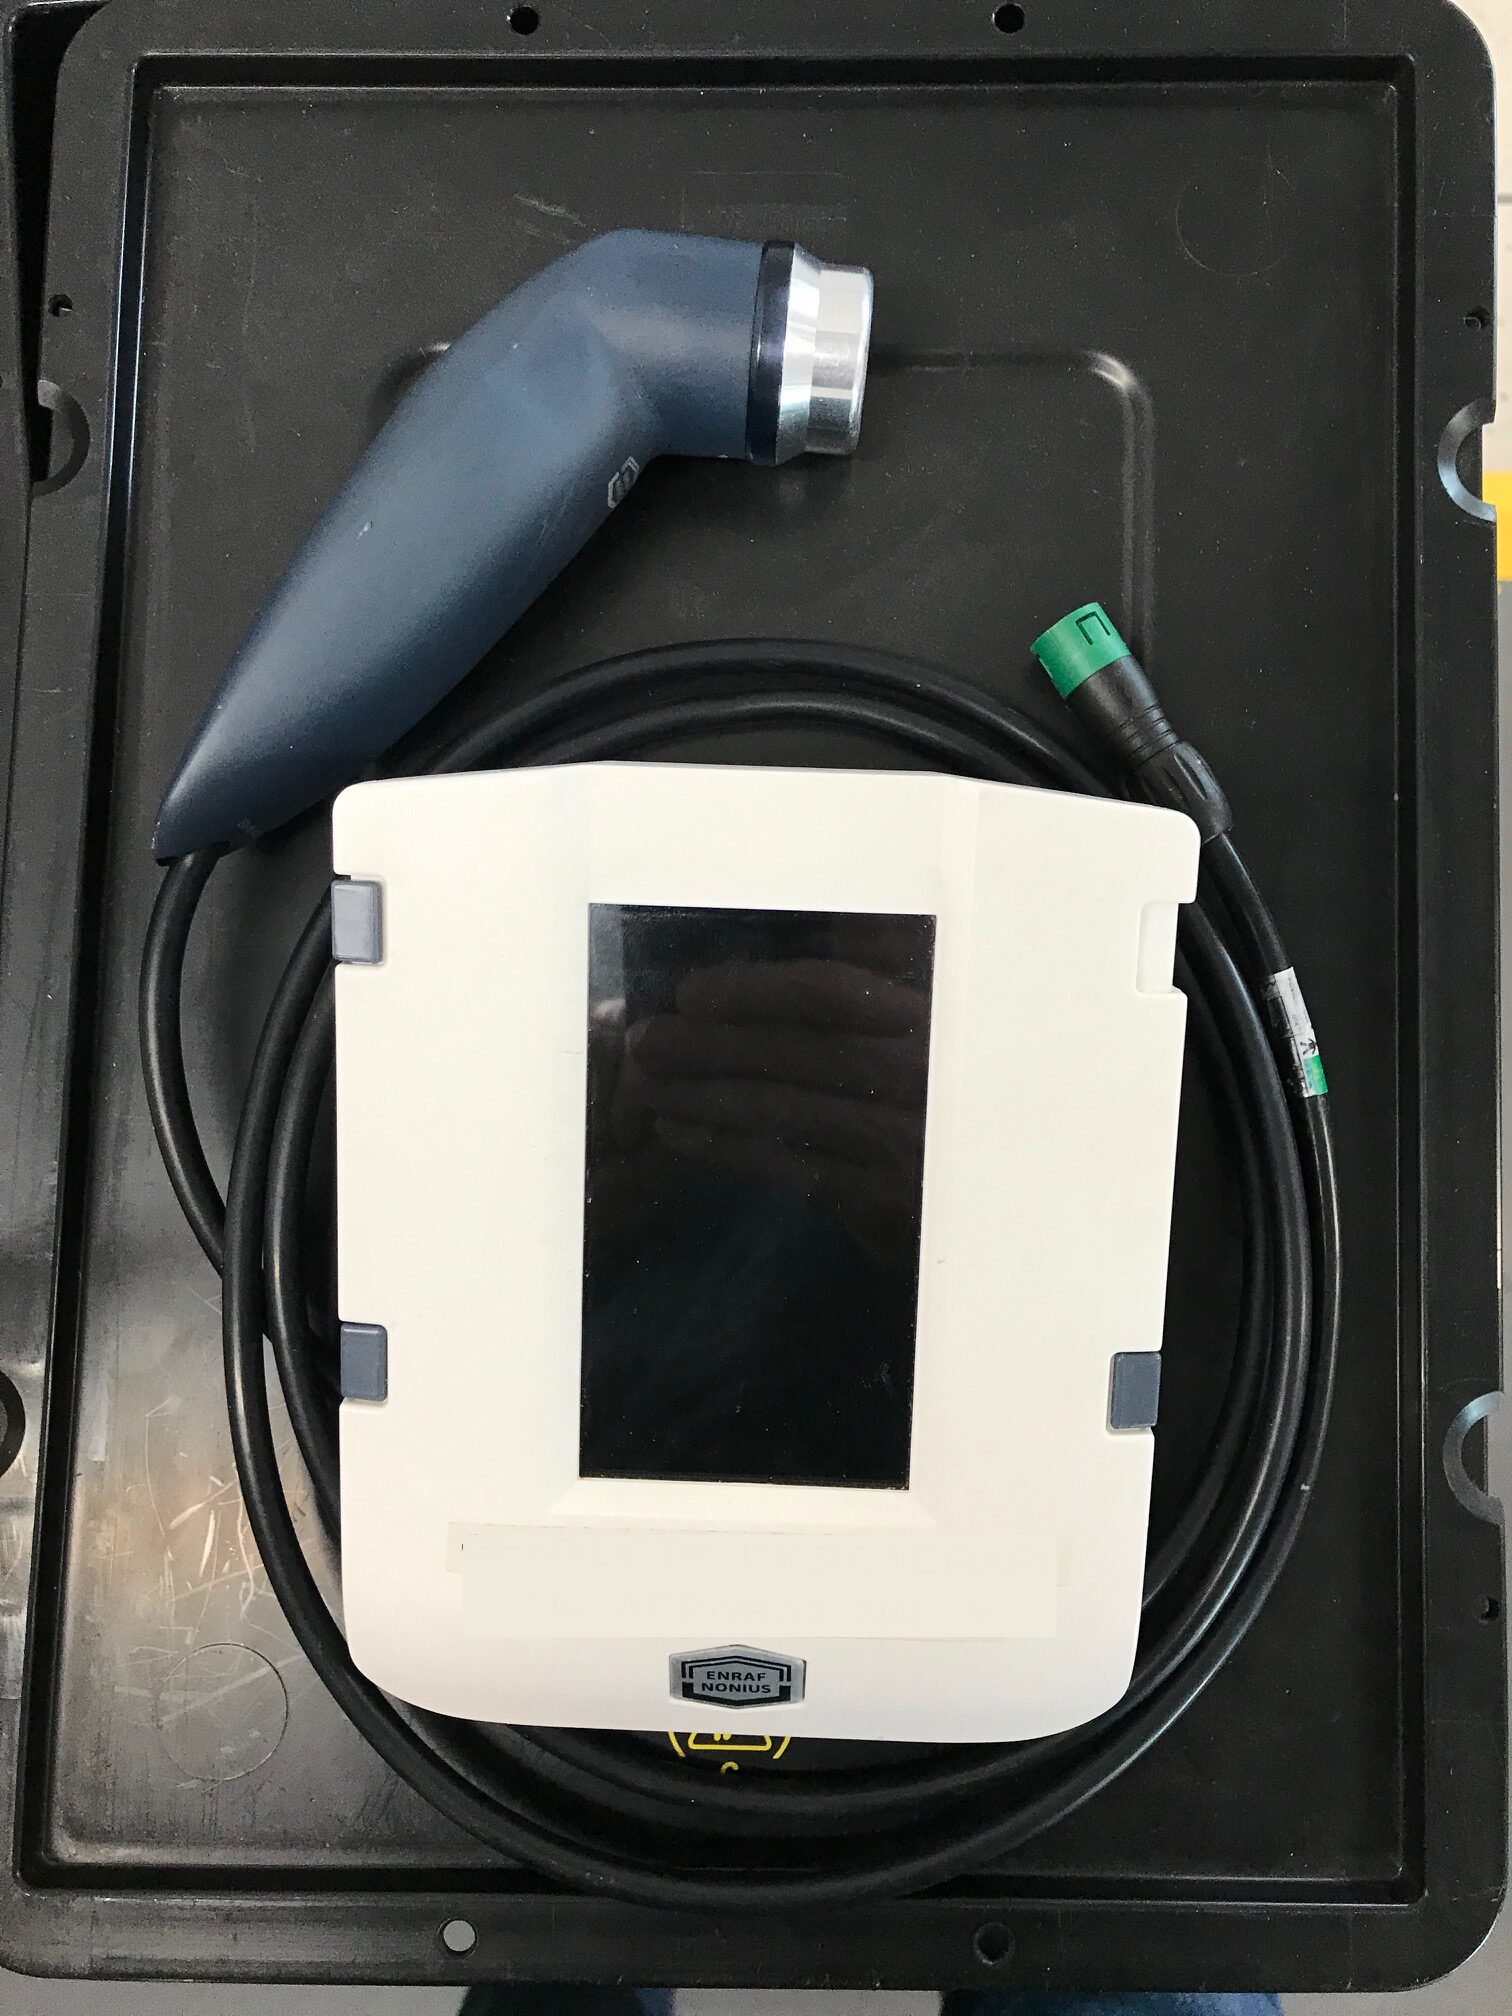 Ultrasound therapy device